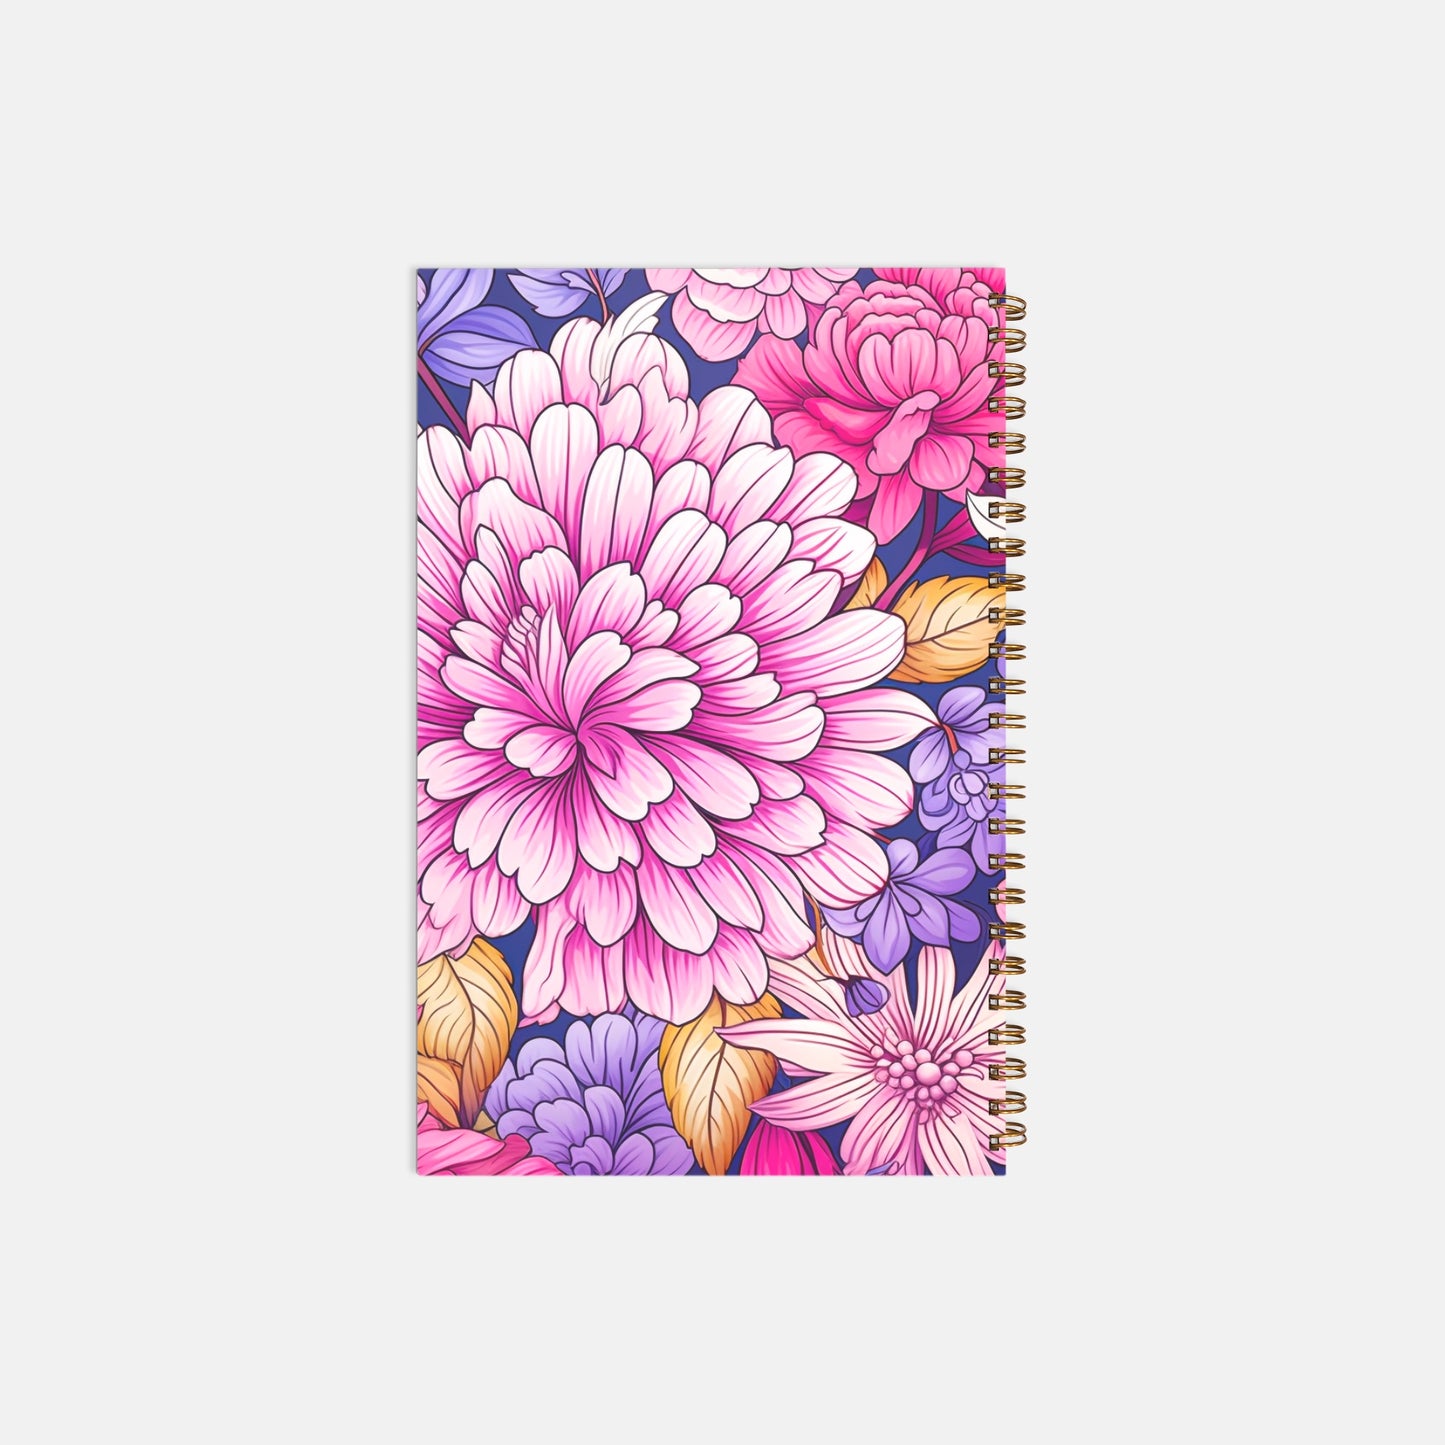 Notebook Hardcover Spiral 5.5 x 8.5 - Pink Foliage